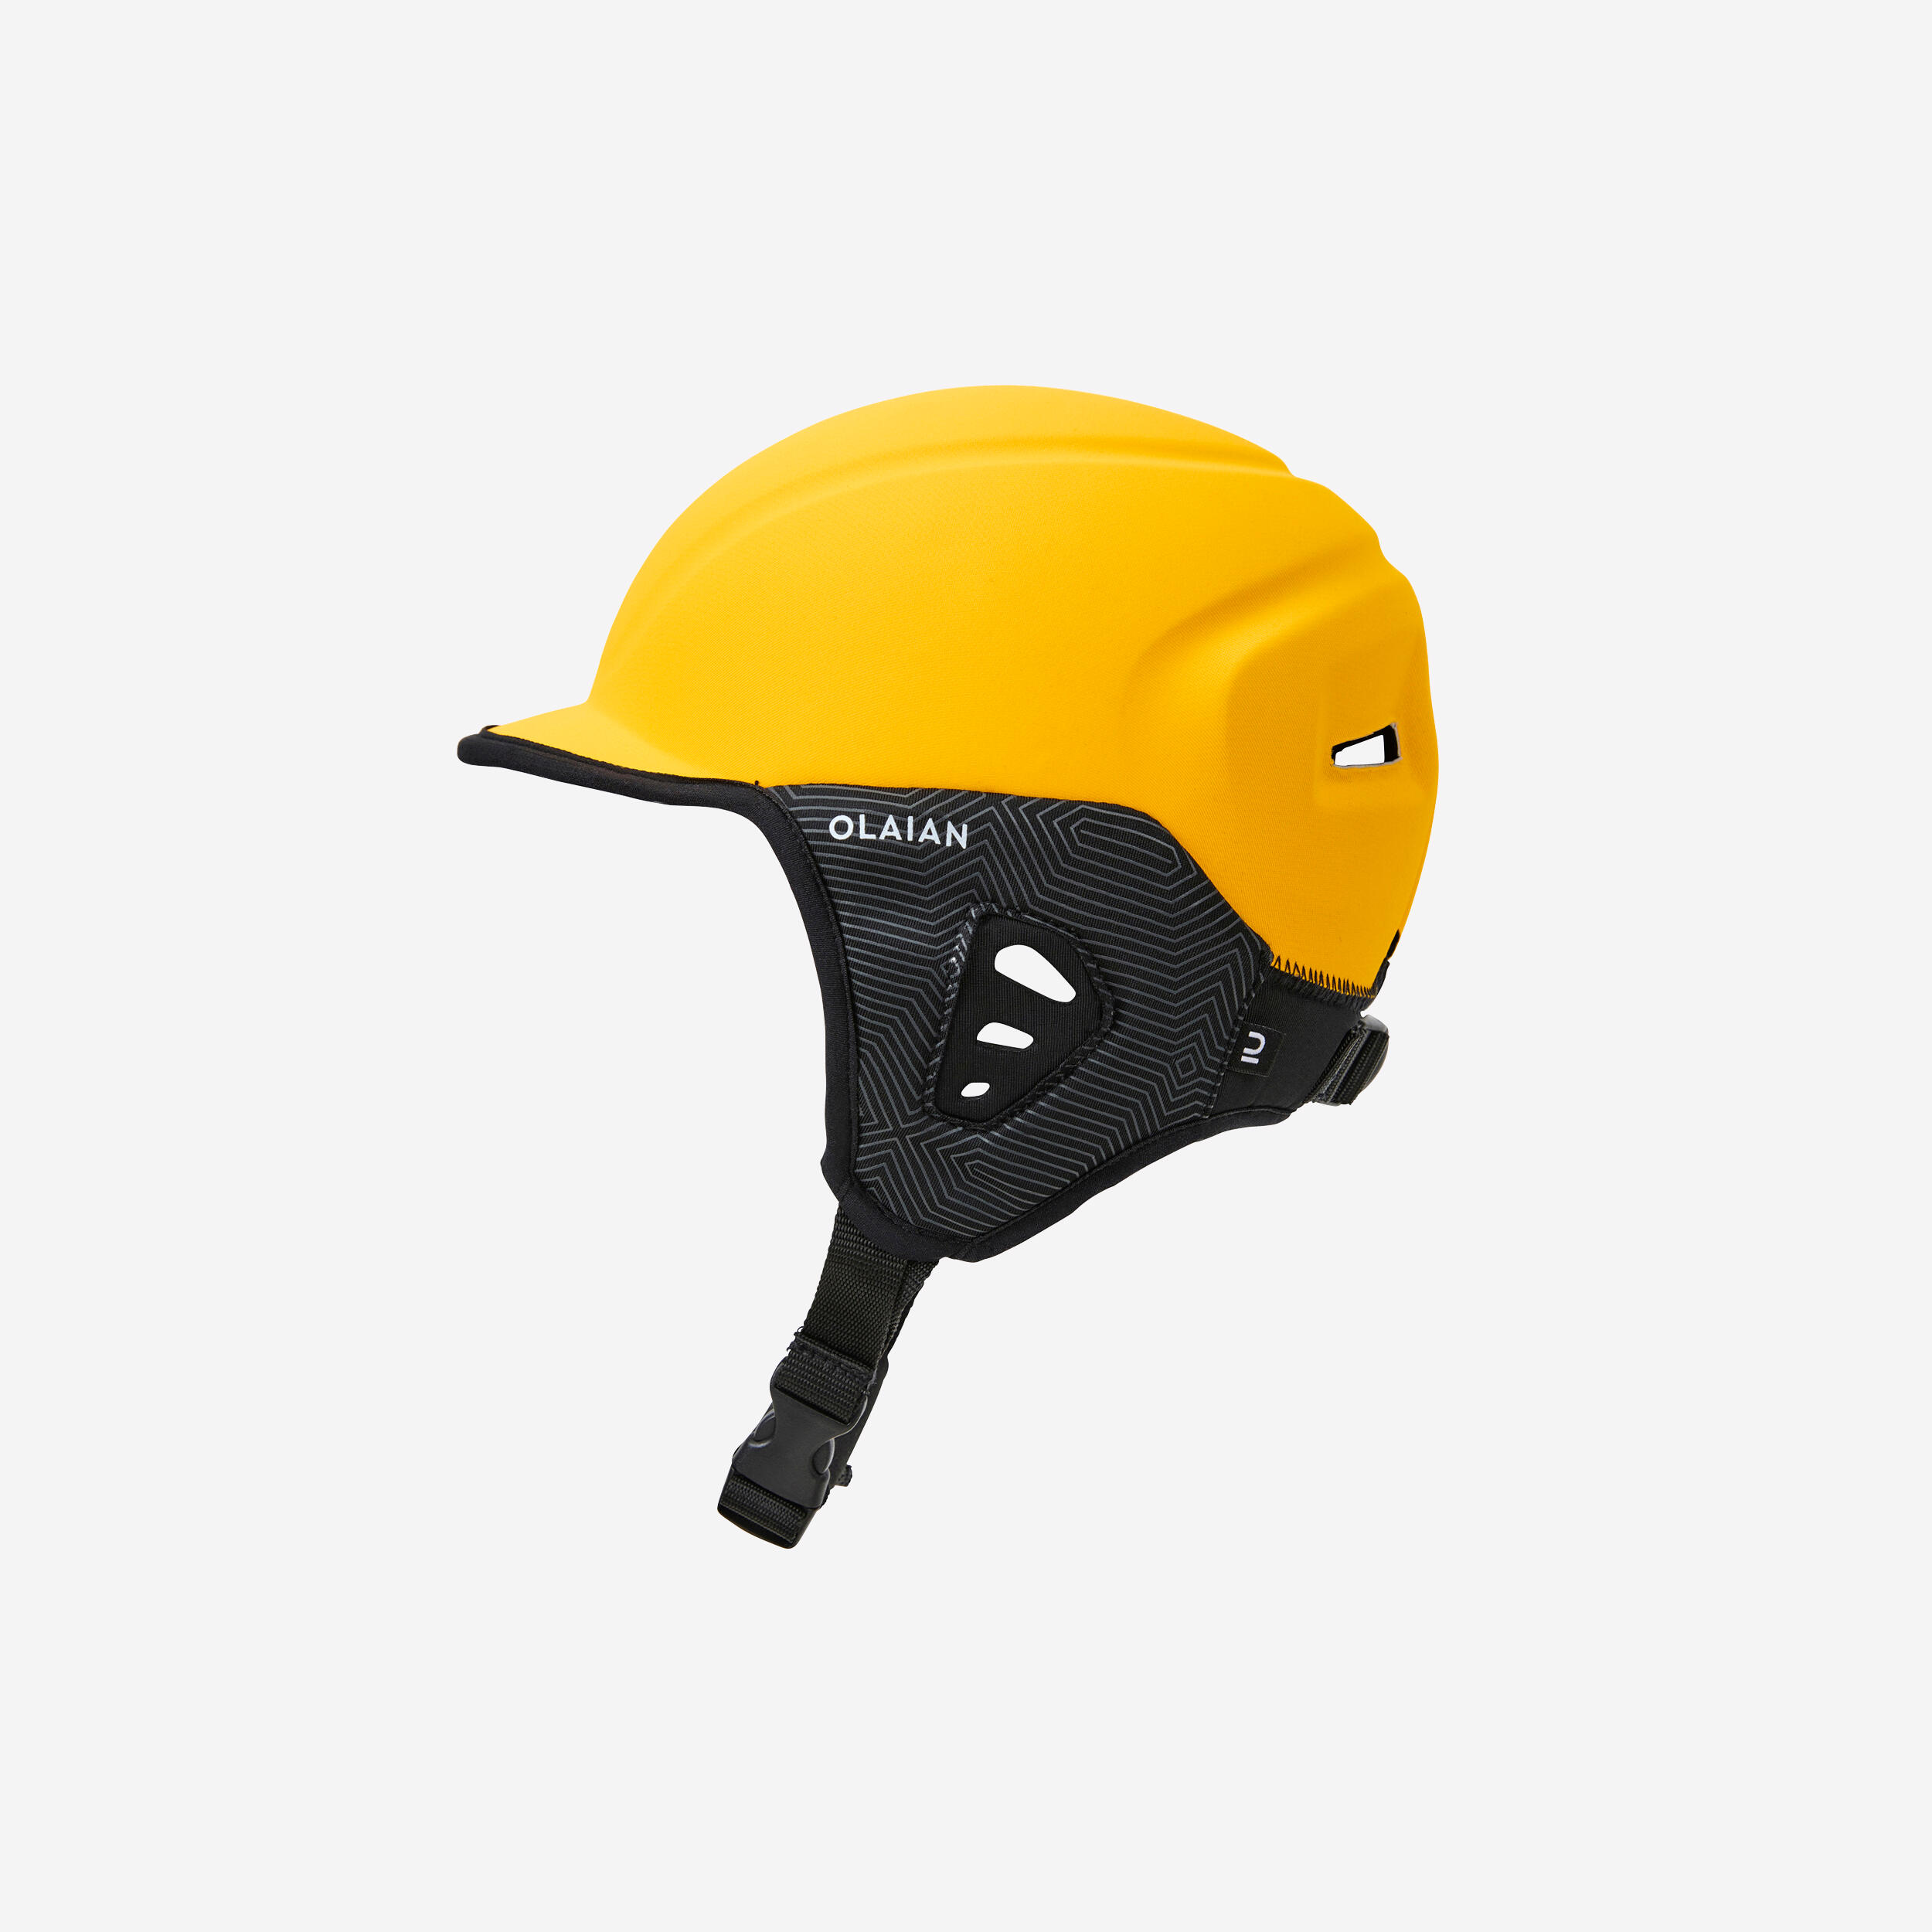 OLAIAN Helmet for surfing.yellow